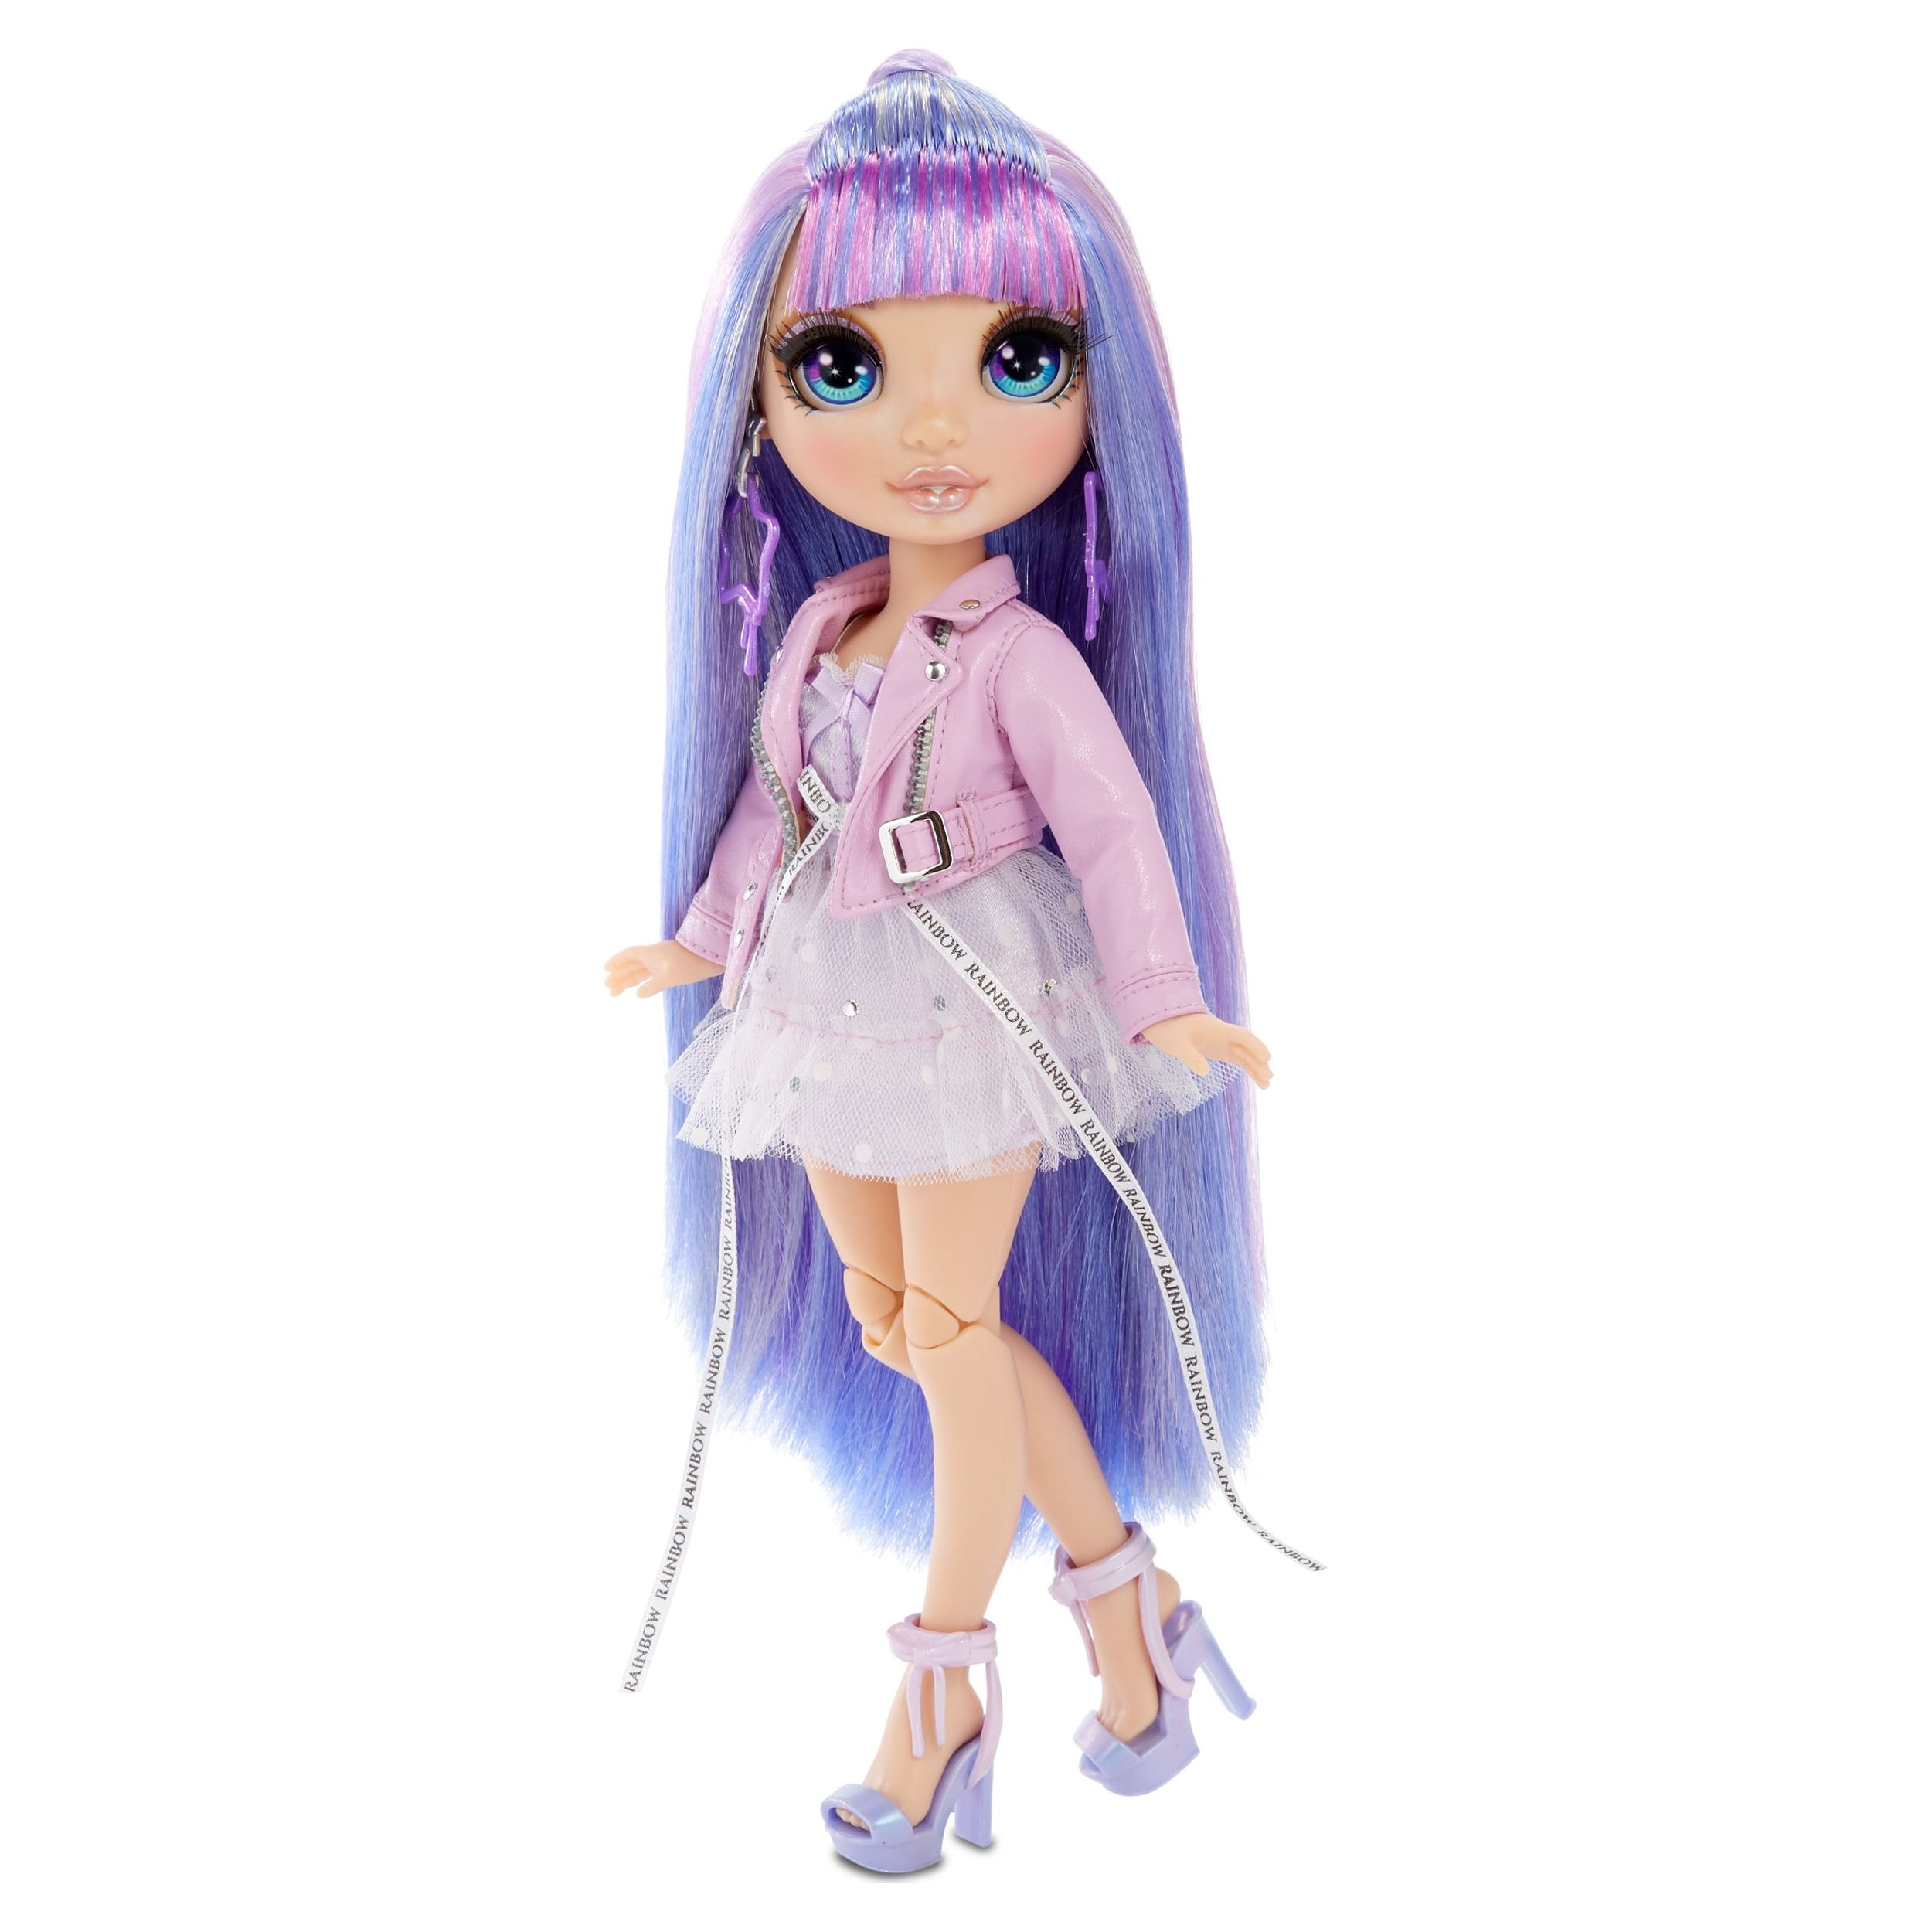 Rainbow High Violet Willow – Purple Fashion Doll with 2 Outfits - image 6 of 9